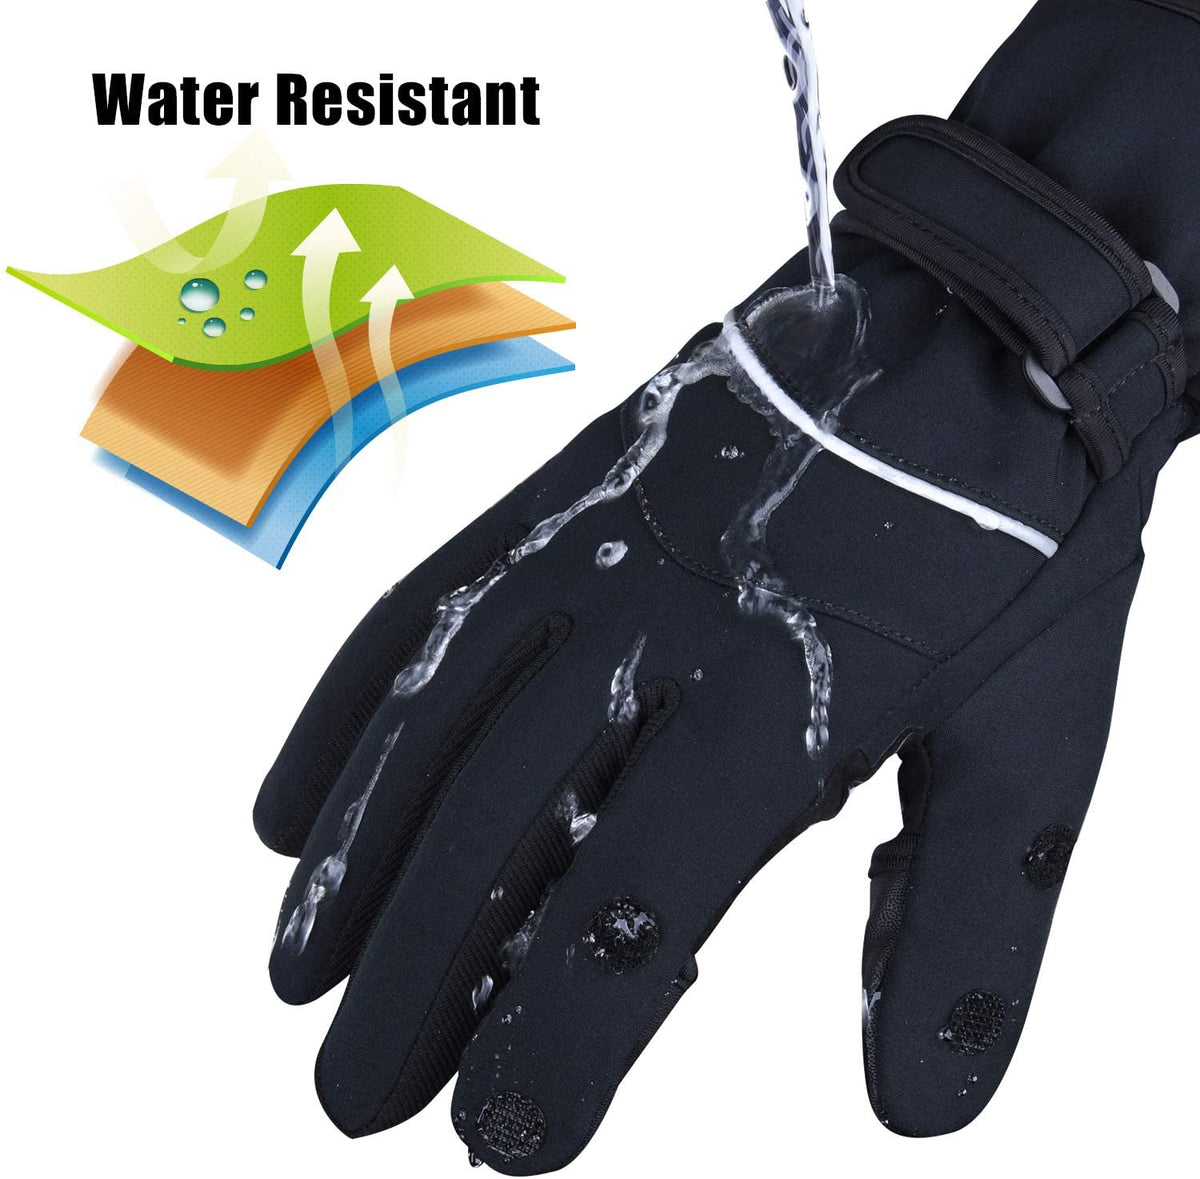 GLJ Golovejoy Winter Gloves Waterproof Windproof Anti-Slip Gloves Cut Fingers Flexible for Photography Fly Fishing Ice Fishing Touchscreen Texting